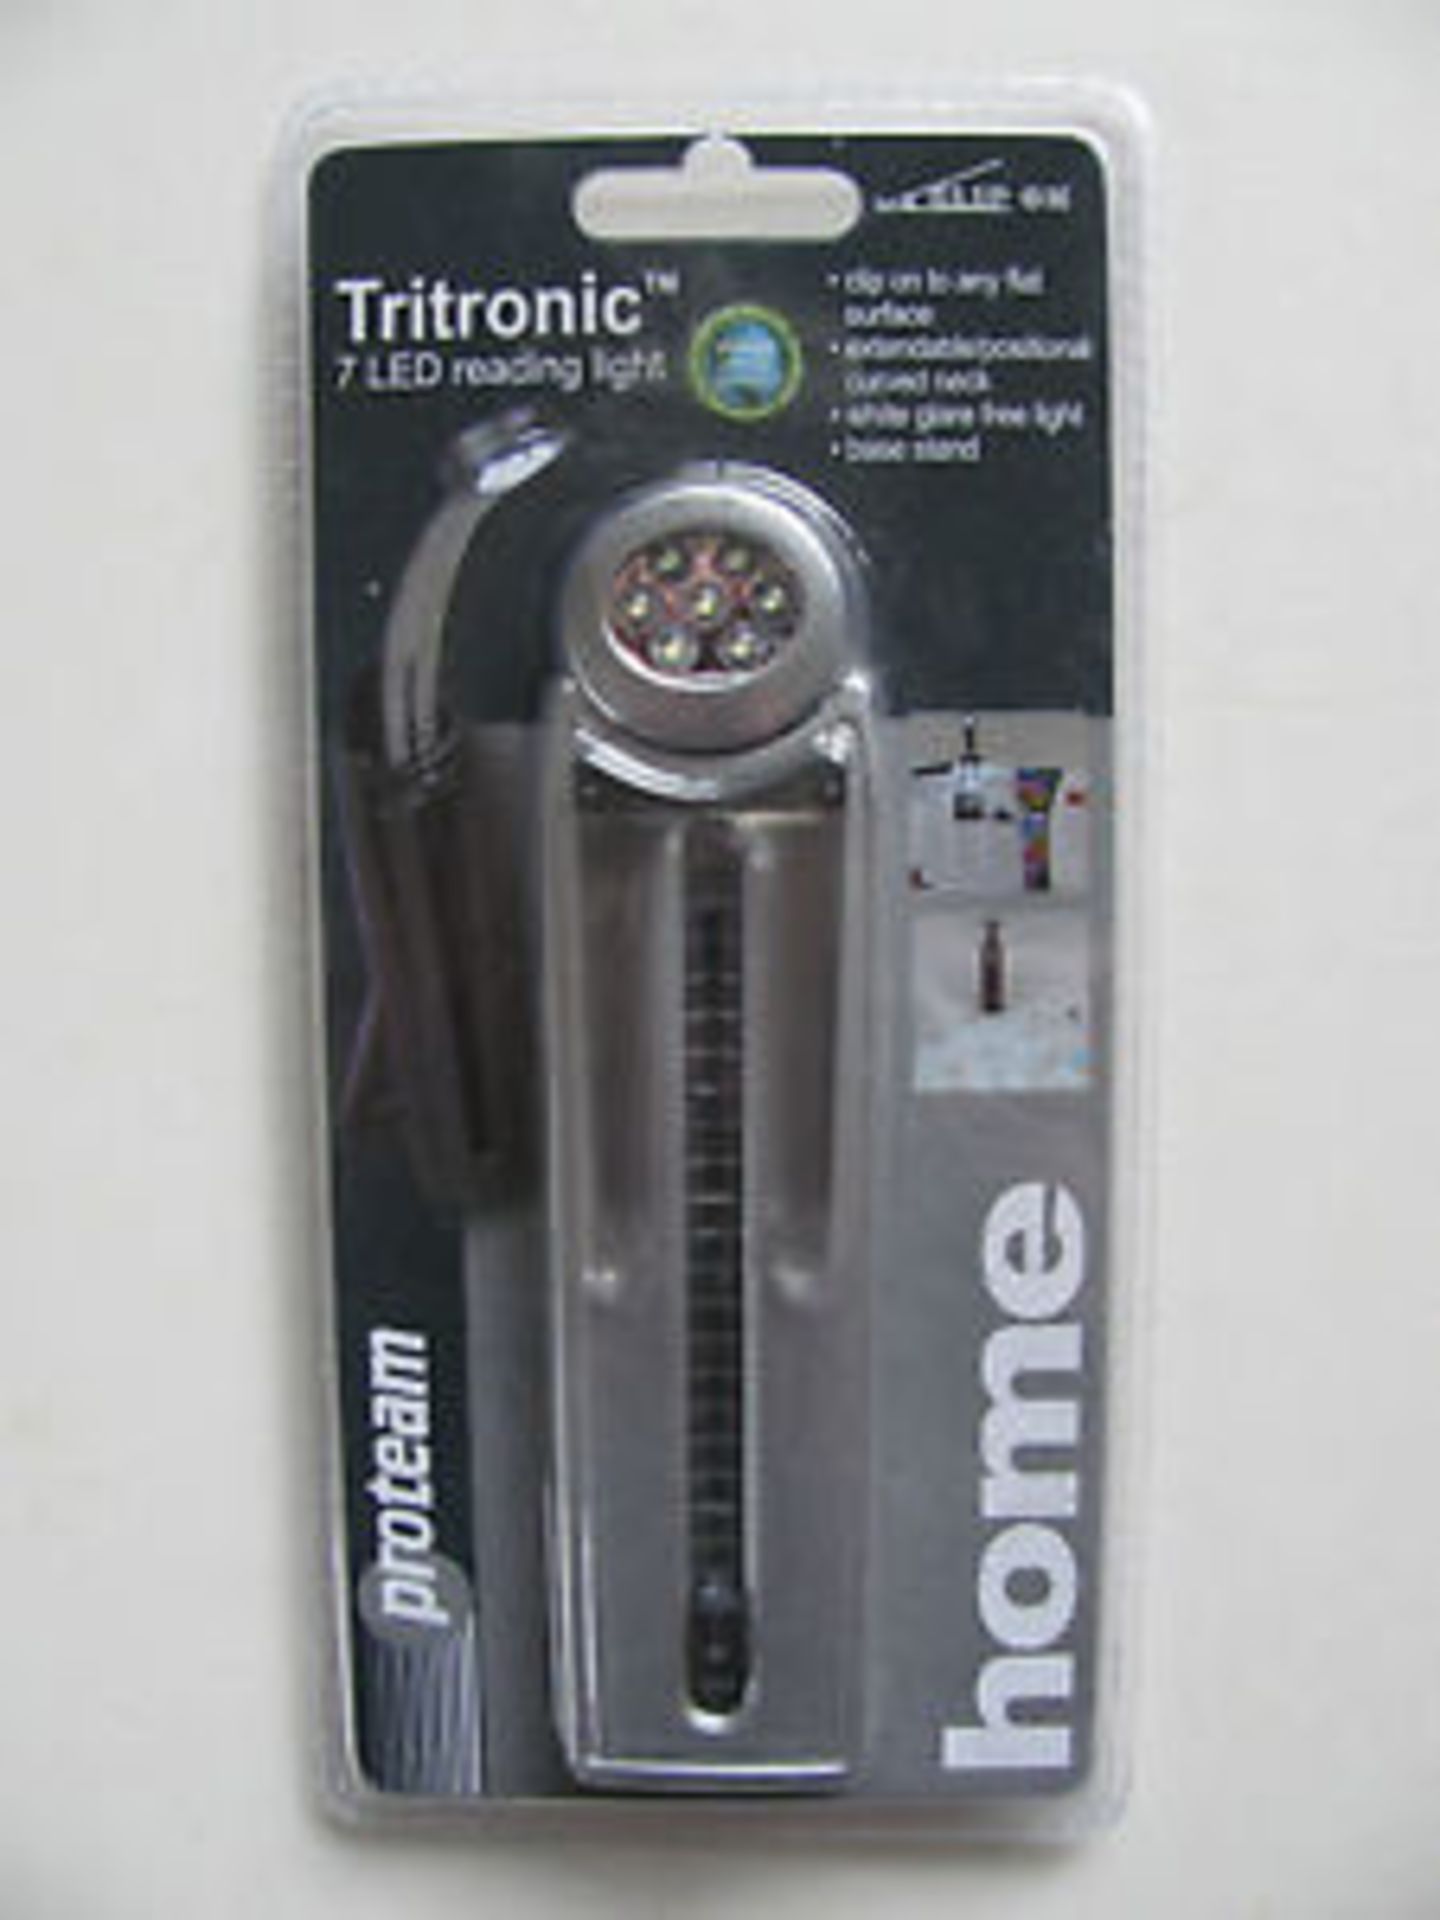 V Brand New Tritronic 7 LED Reading Light With Clip & Stand X 2 YOUR BID PRICE TO BE MULTIPLIED BY